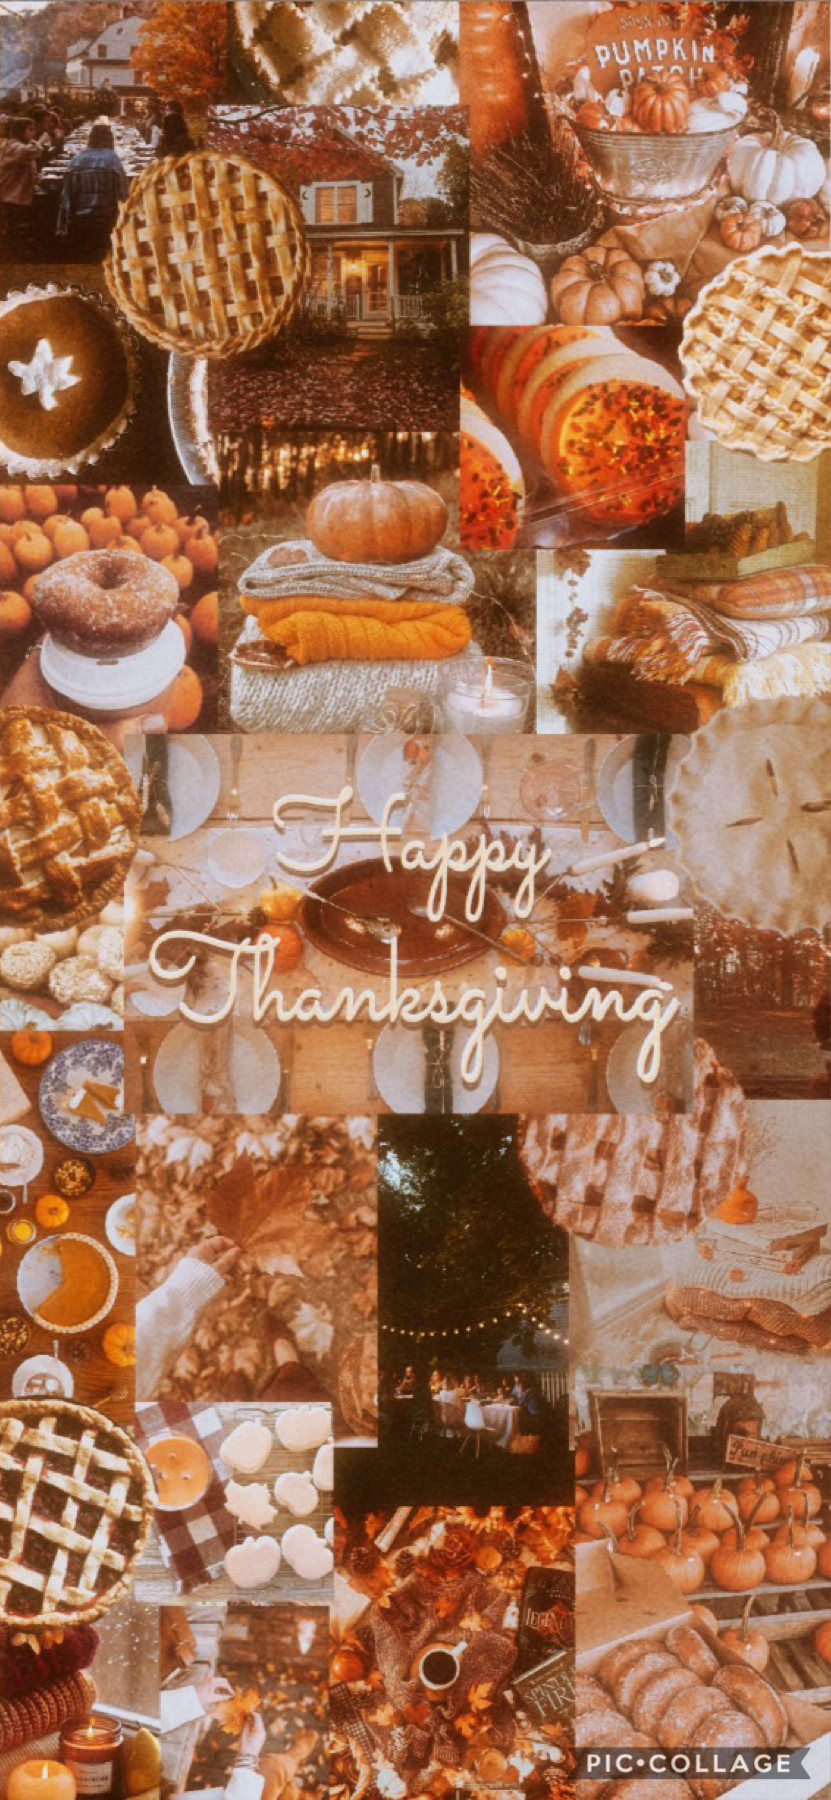 🍂 Happy Thanksgiving 🍽 
I am beyond thankful for all of my followers🥰 you guys have no clue the joy you bring to my life! I hope you all have a wonderful thanksgiving, ily 
xox~ wandering1 